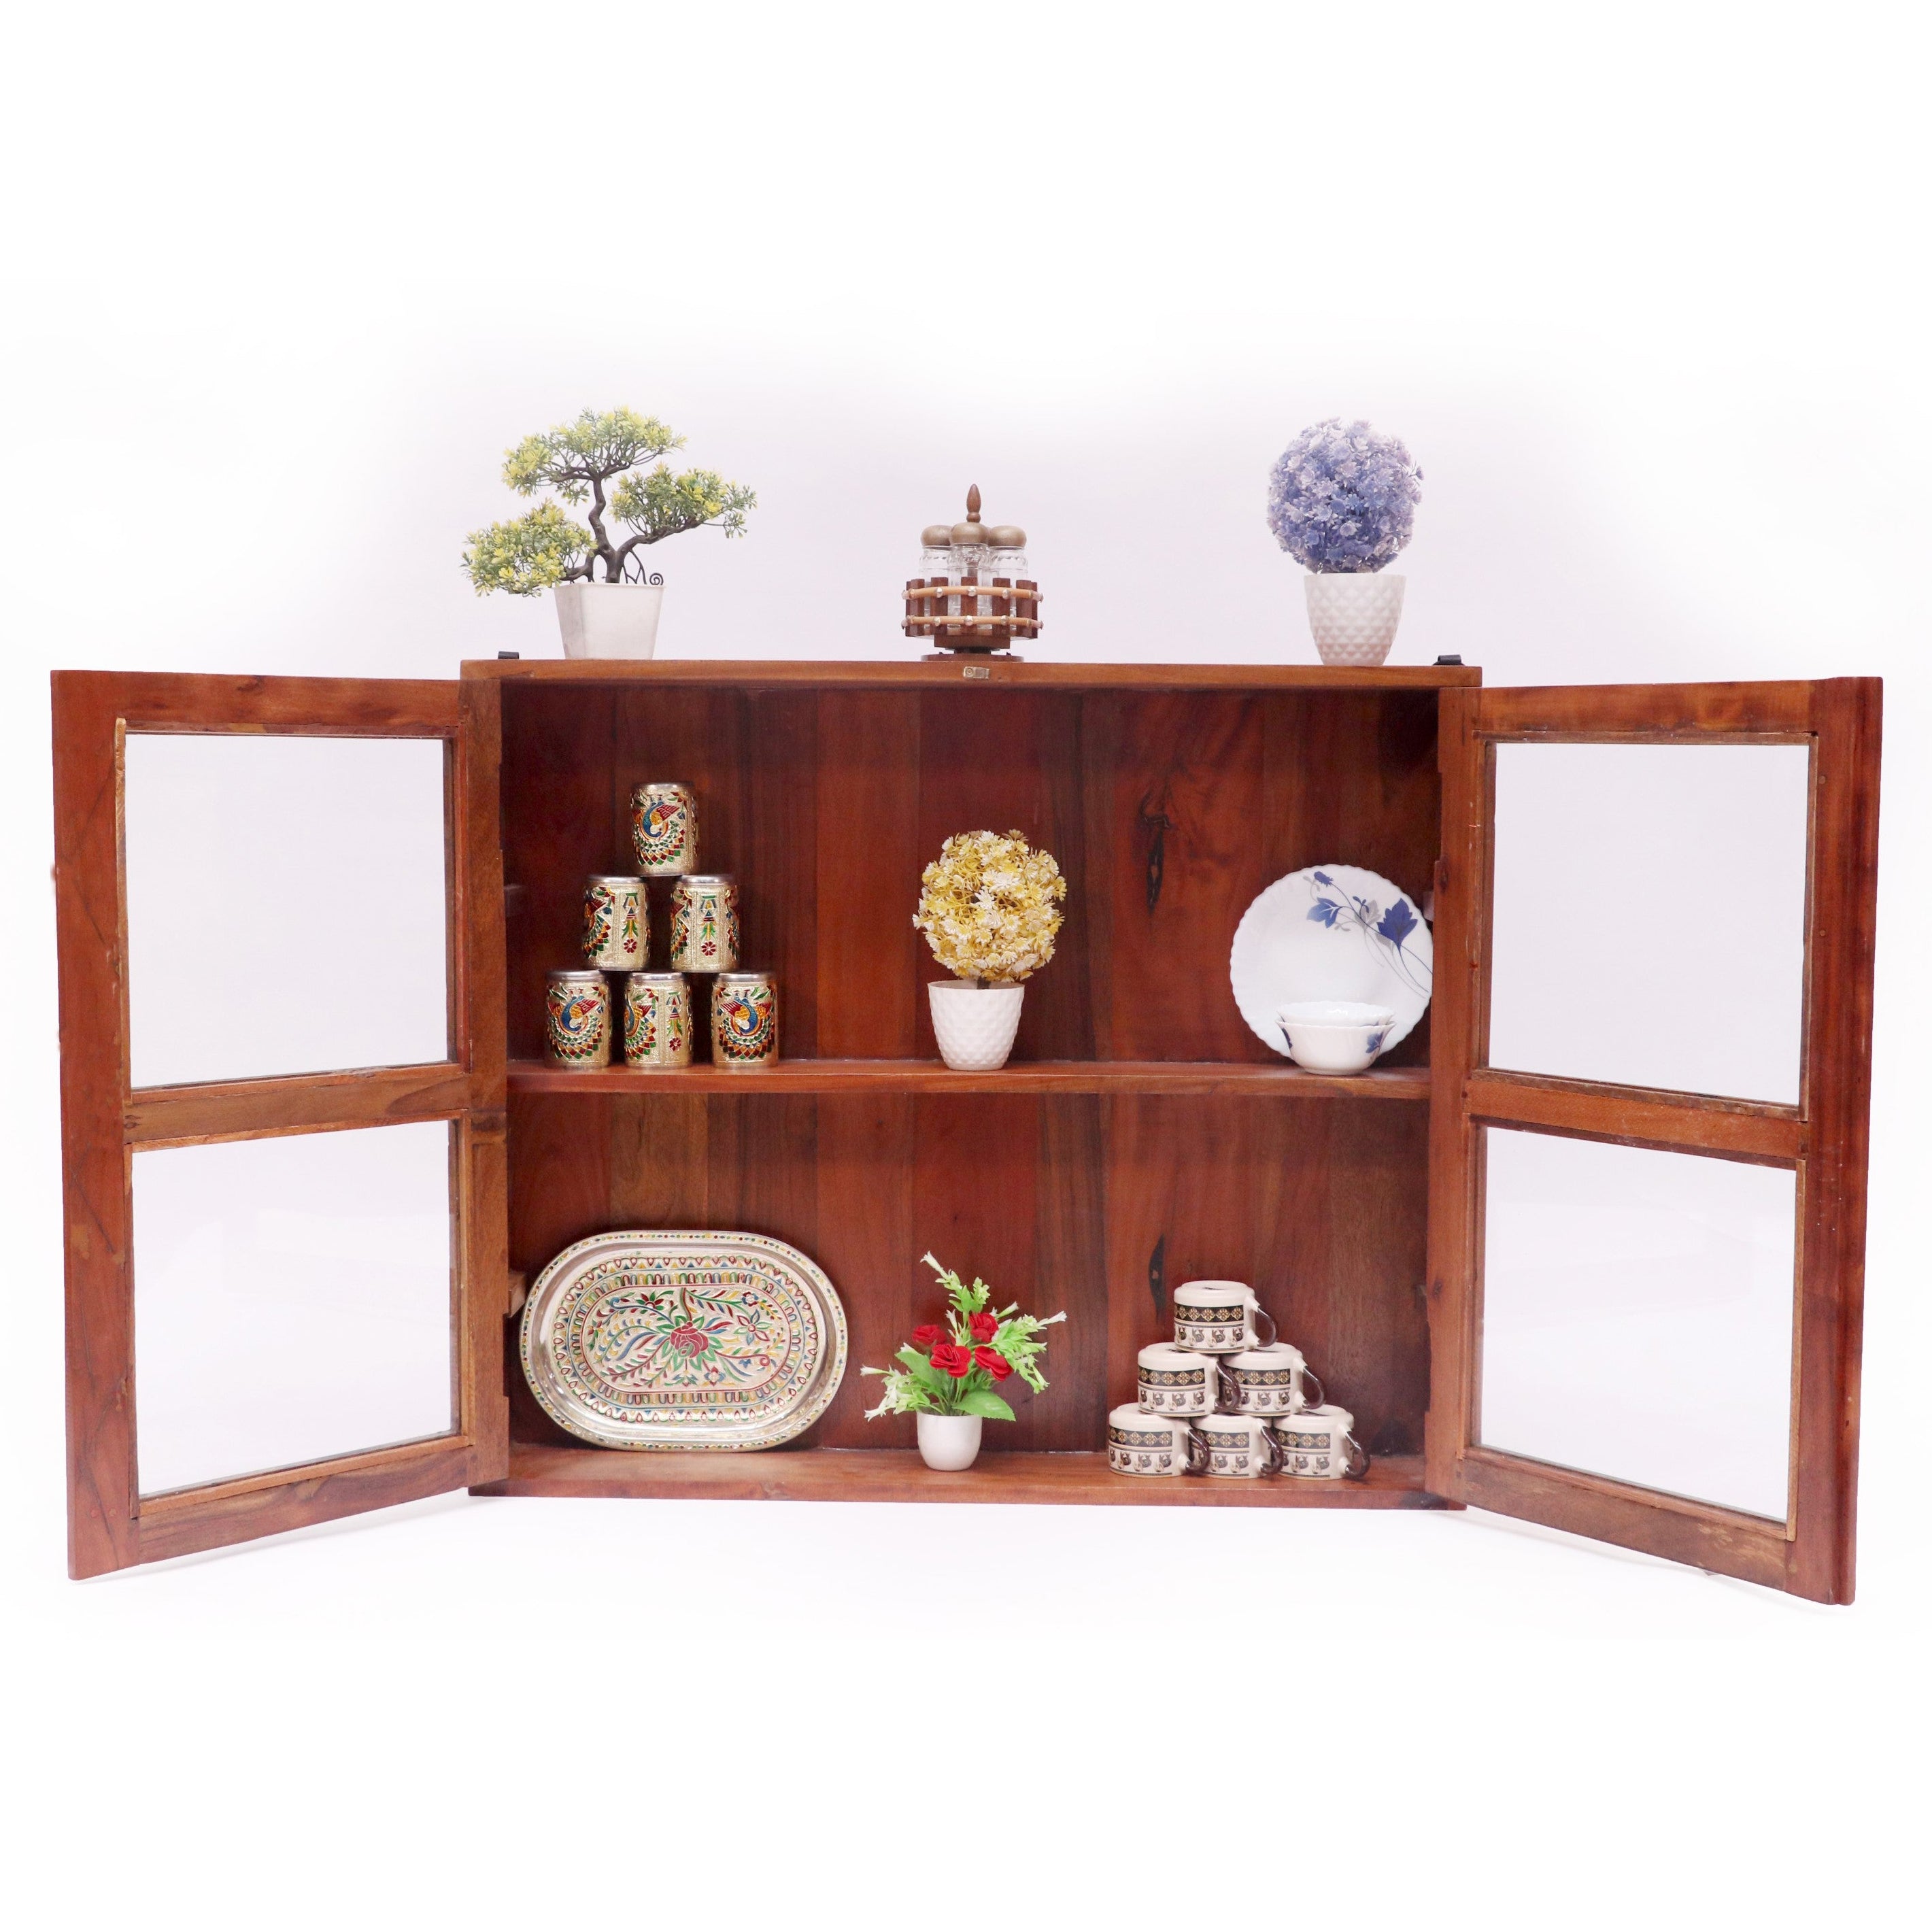 36 x 6 x 30 Inch Long Wide Hanging Cabinet Wall Cabinet